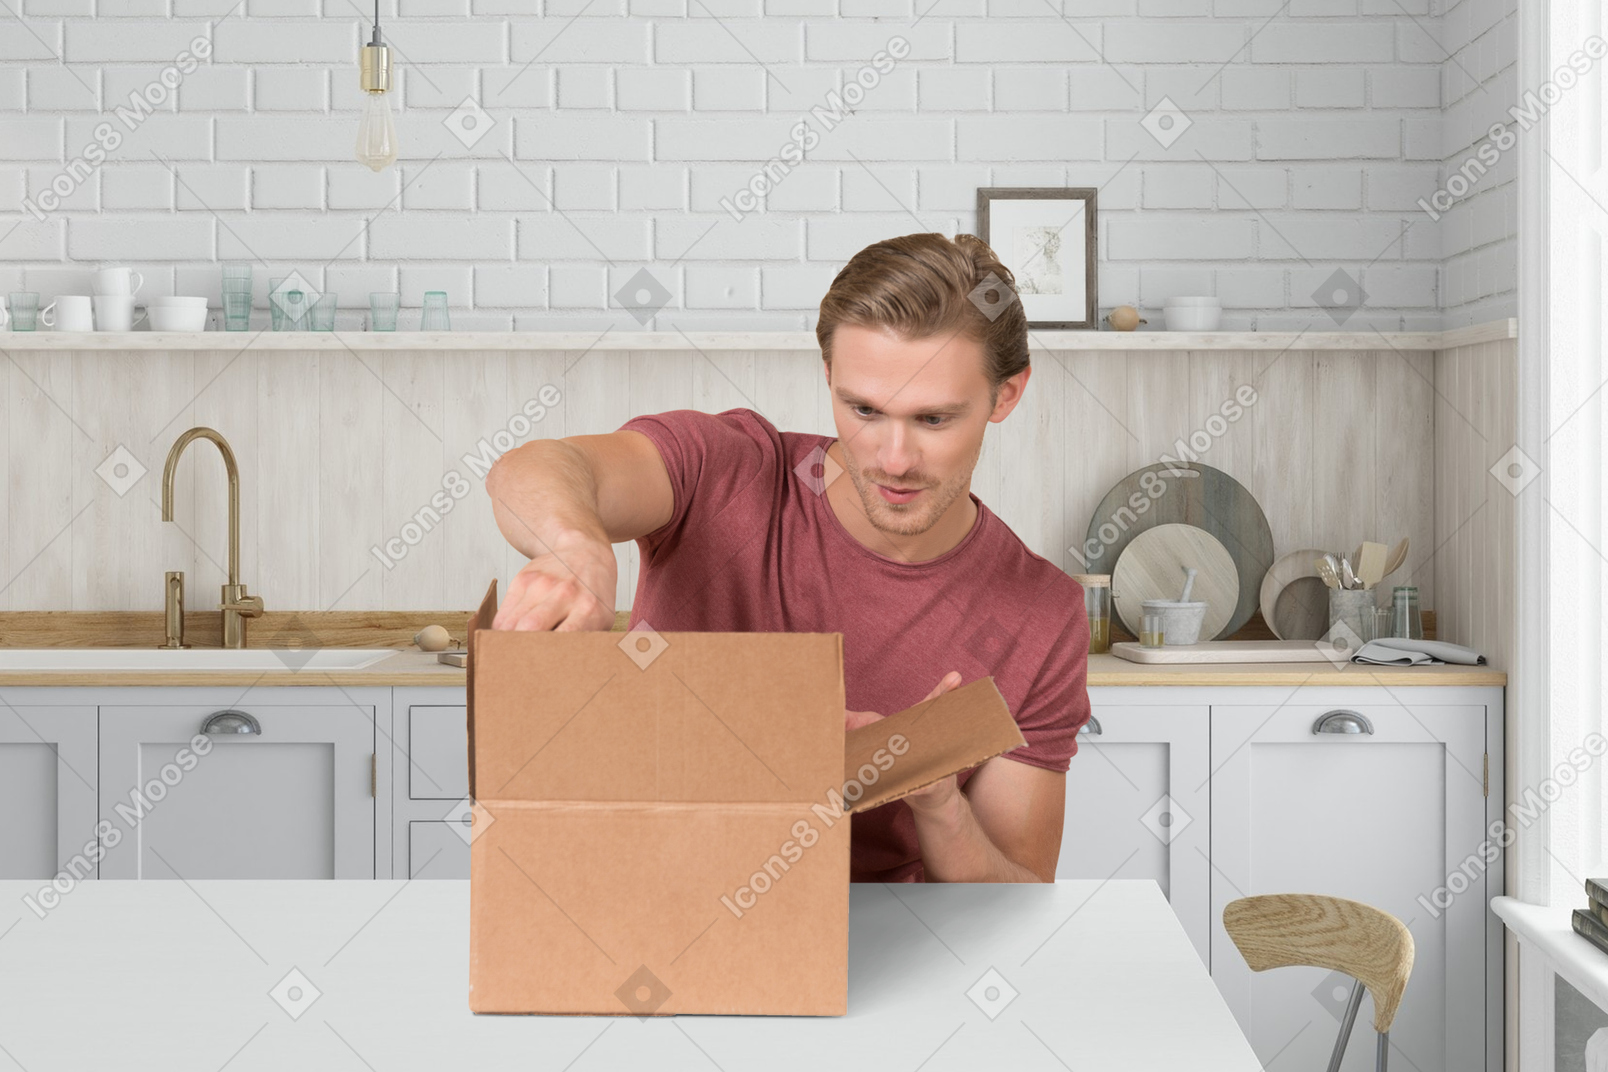 Man moving a cardboard box into a new home